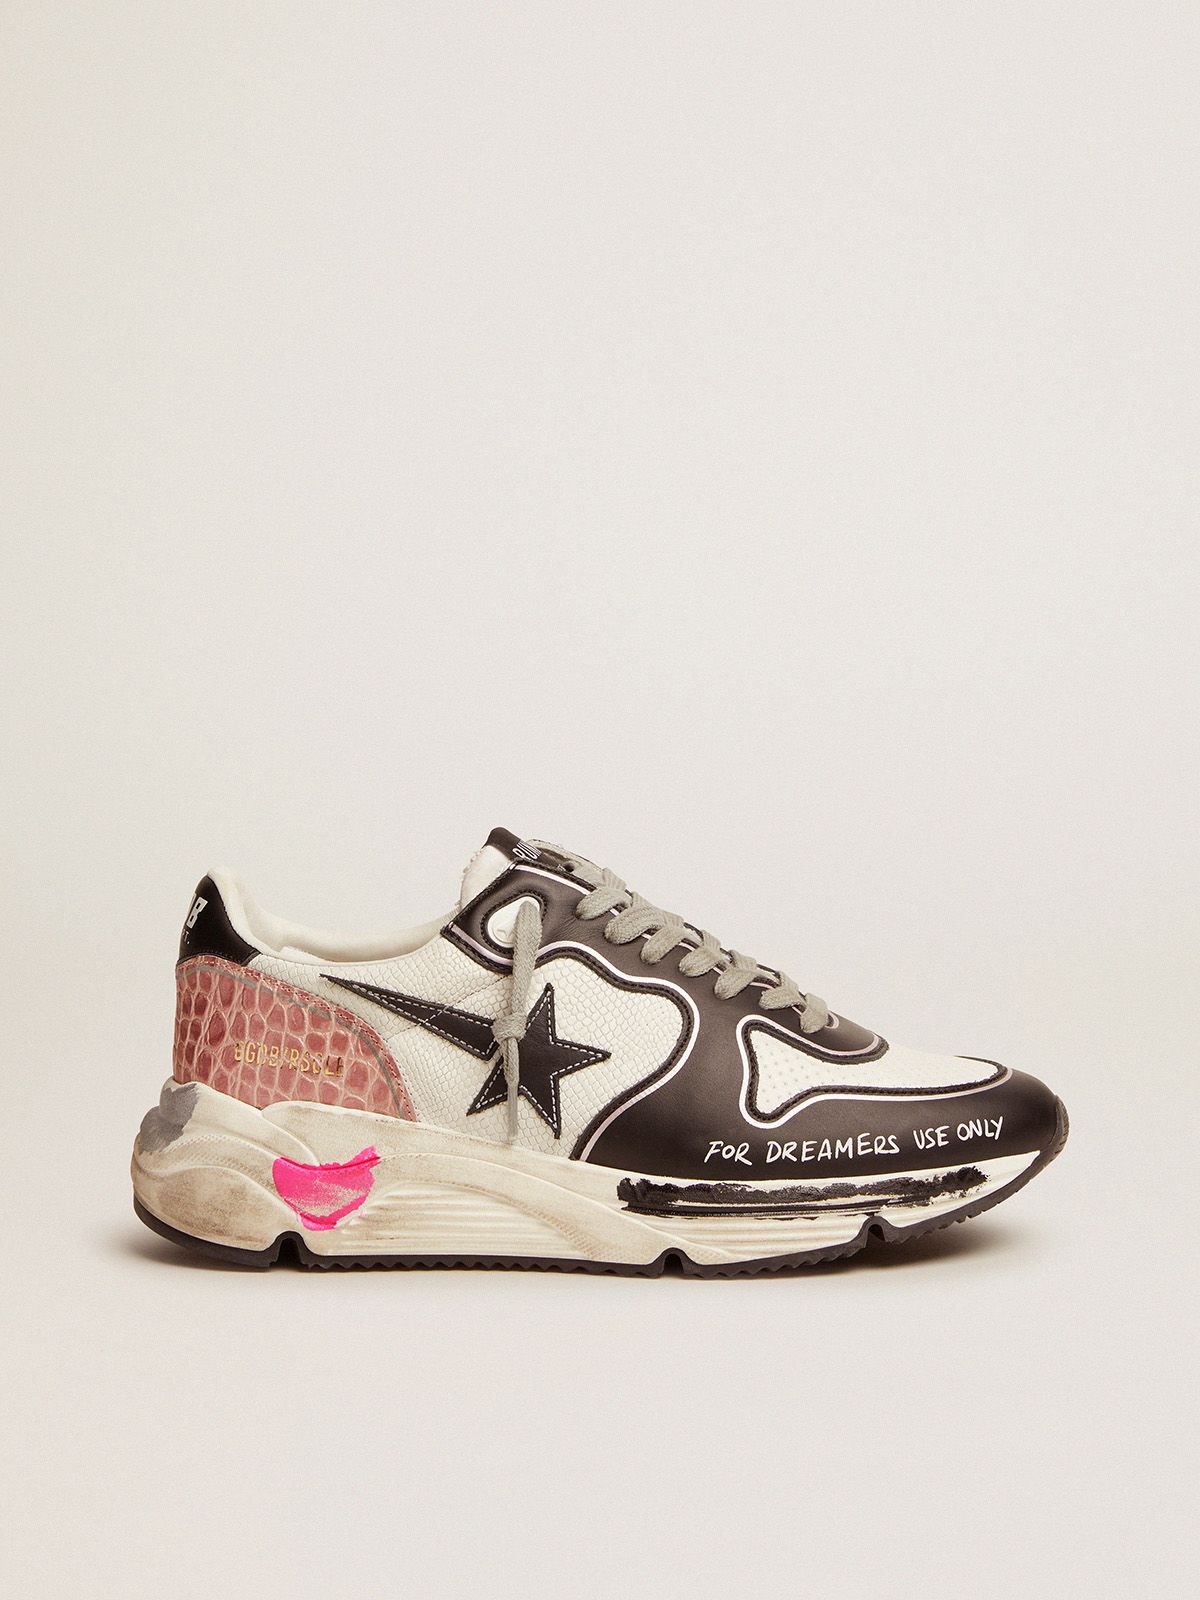 golden goose with black sneakers leather snake-print details Sole white in contrasting Running